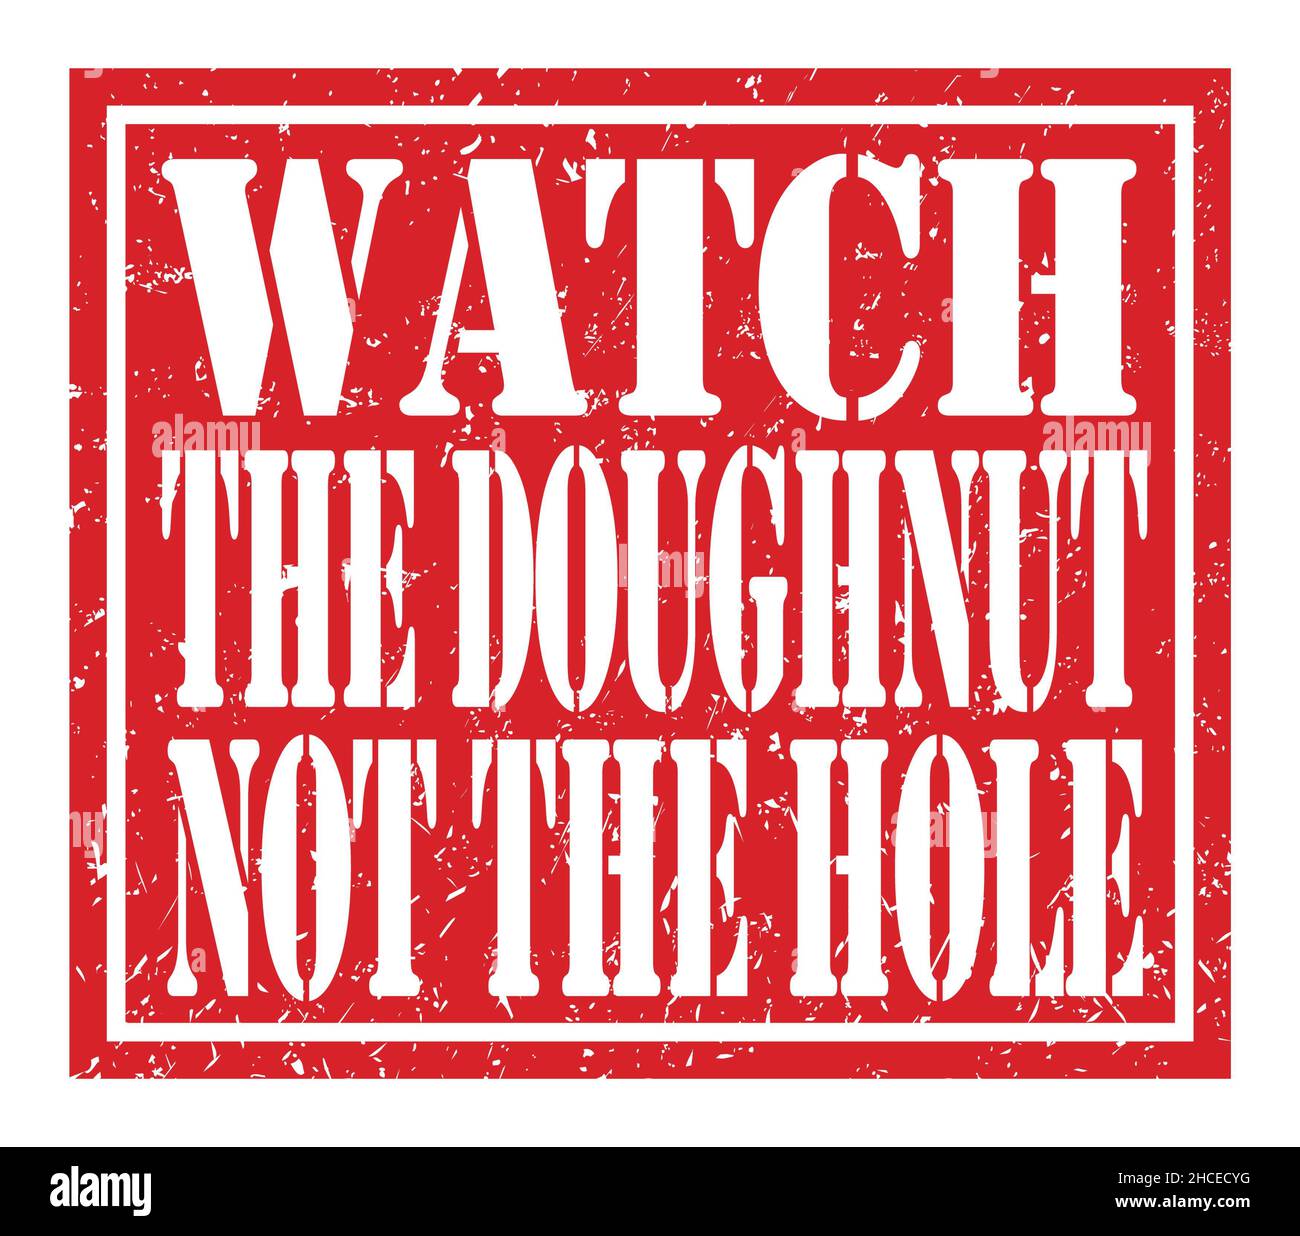 WATCH THE DOUGHNUT NOT THE HOLE, words written on red stamp sign Stock Photo